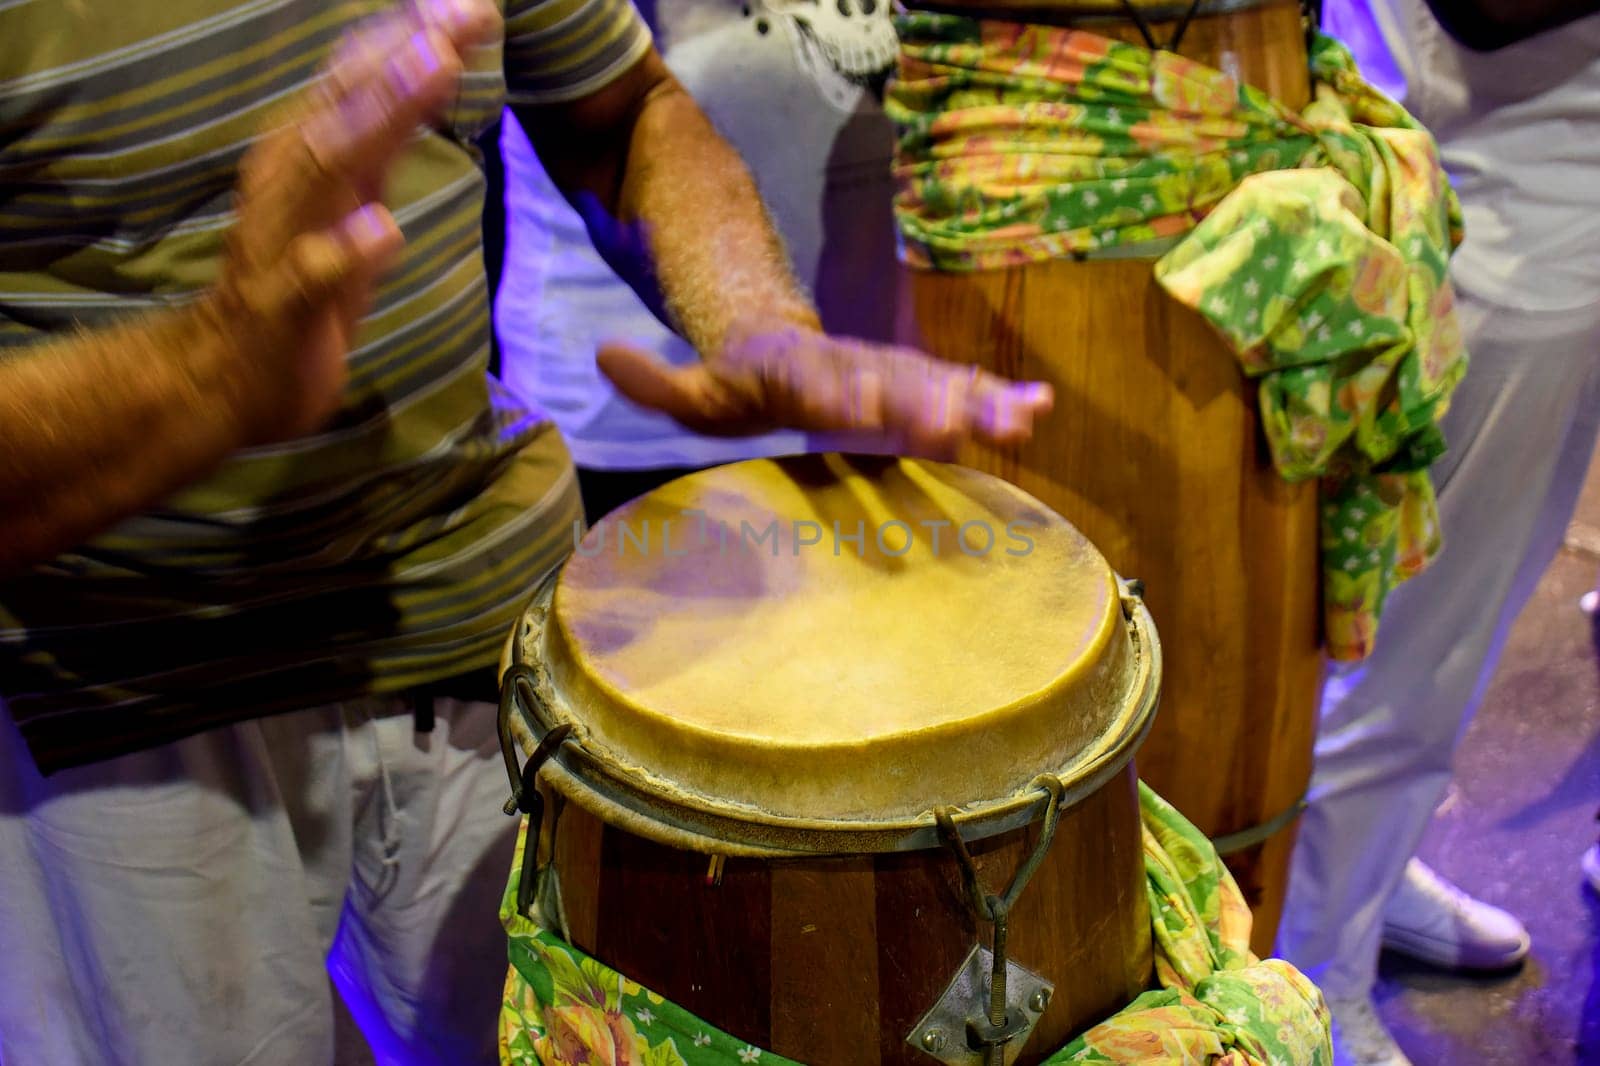 Hand drums called atabaque in Brazil used during a typical Umbanda ceremony, an Afro-Brazilian religion where they are the main instruments